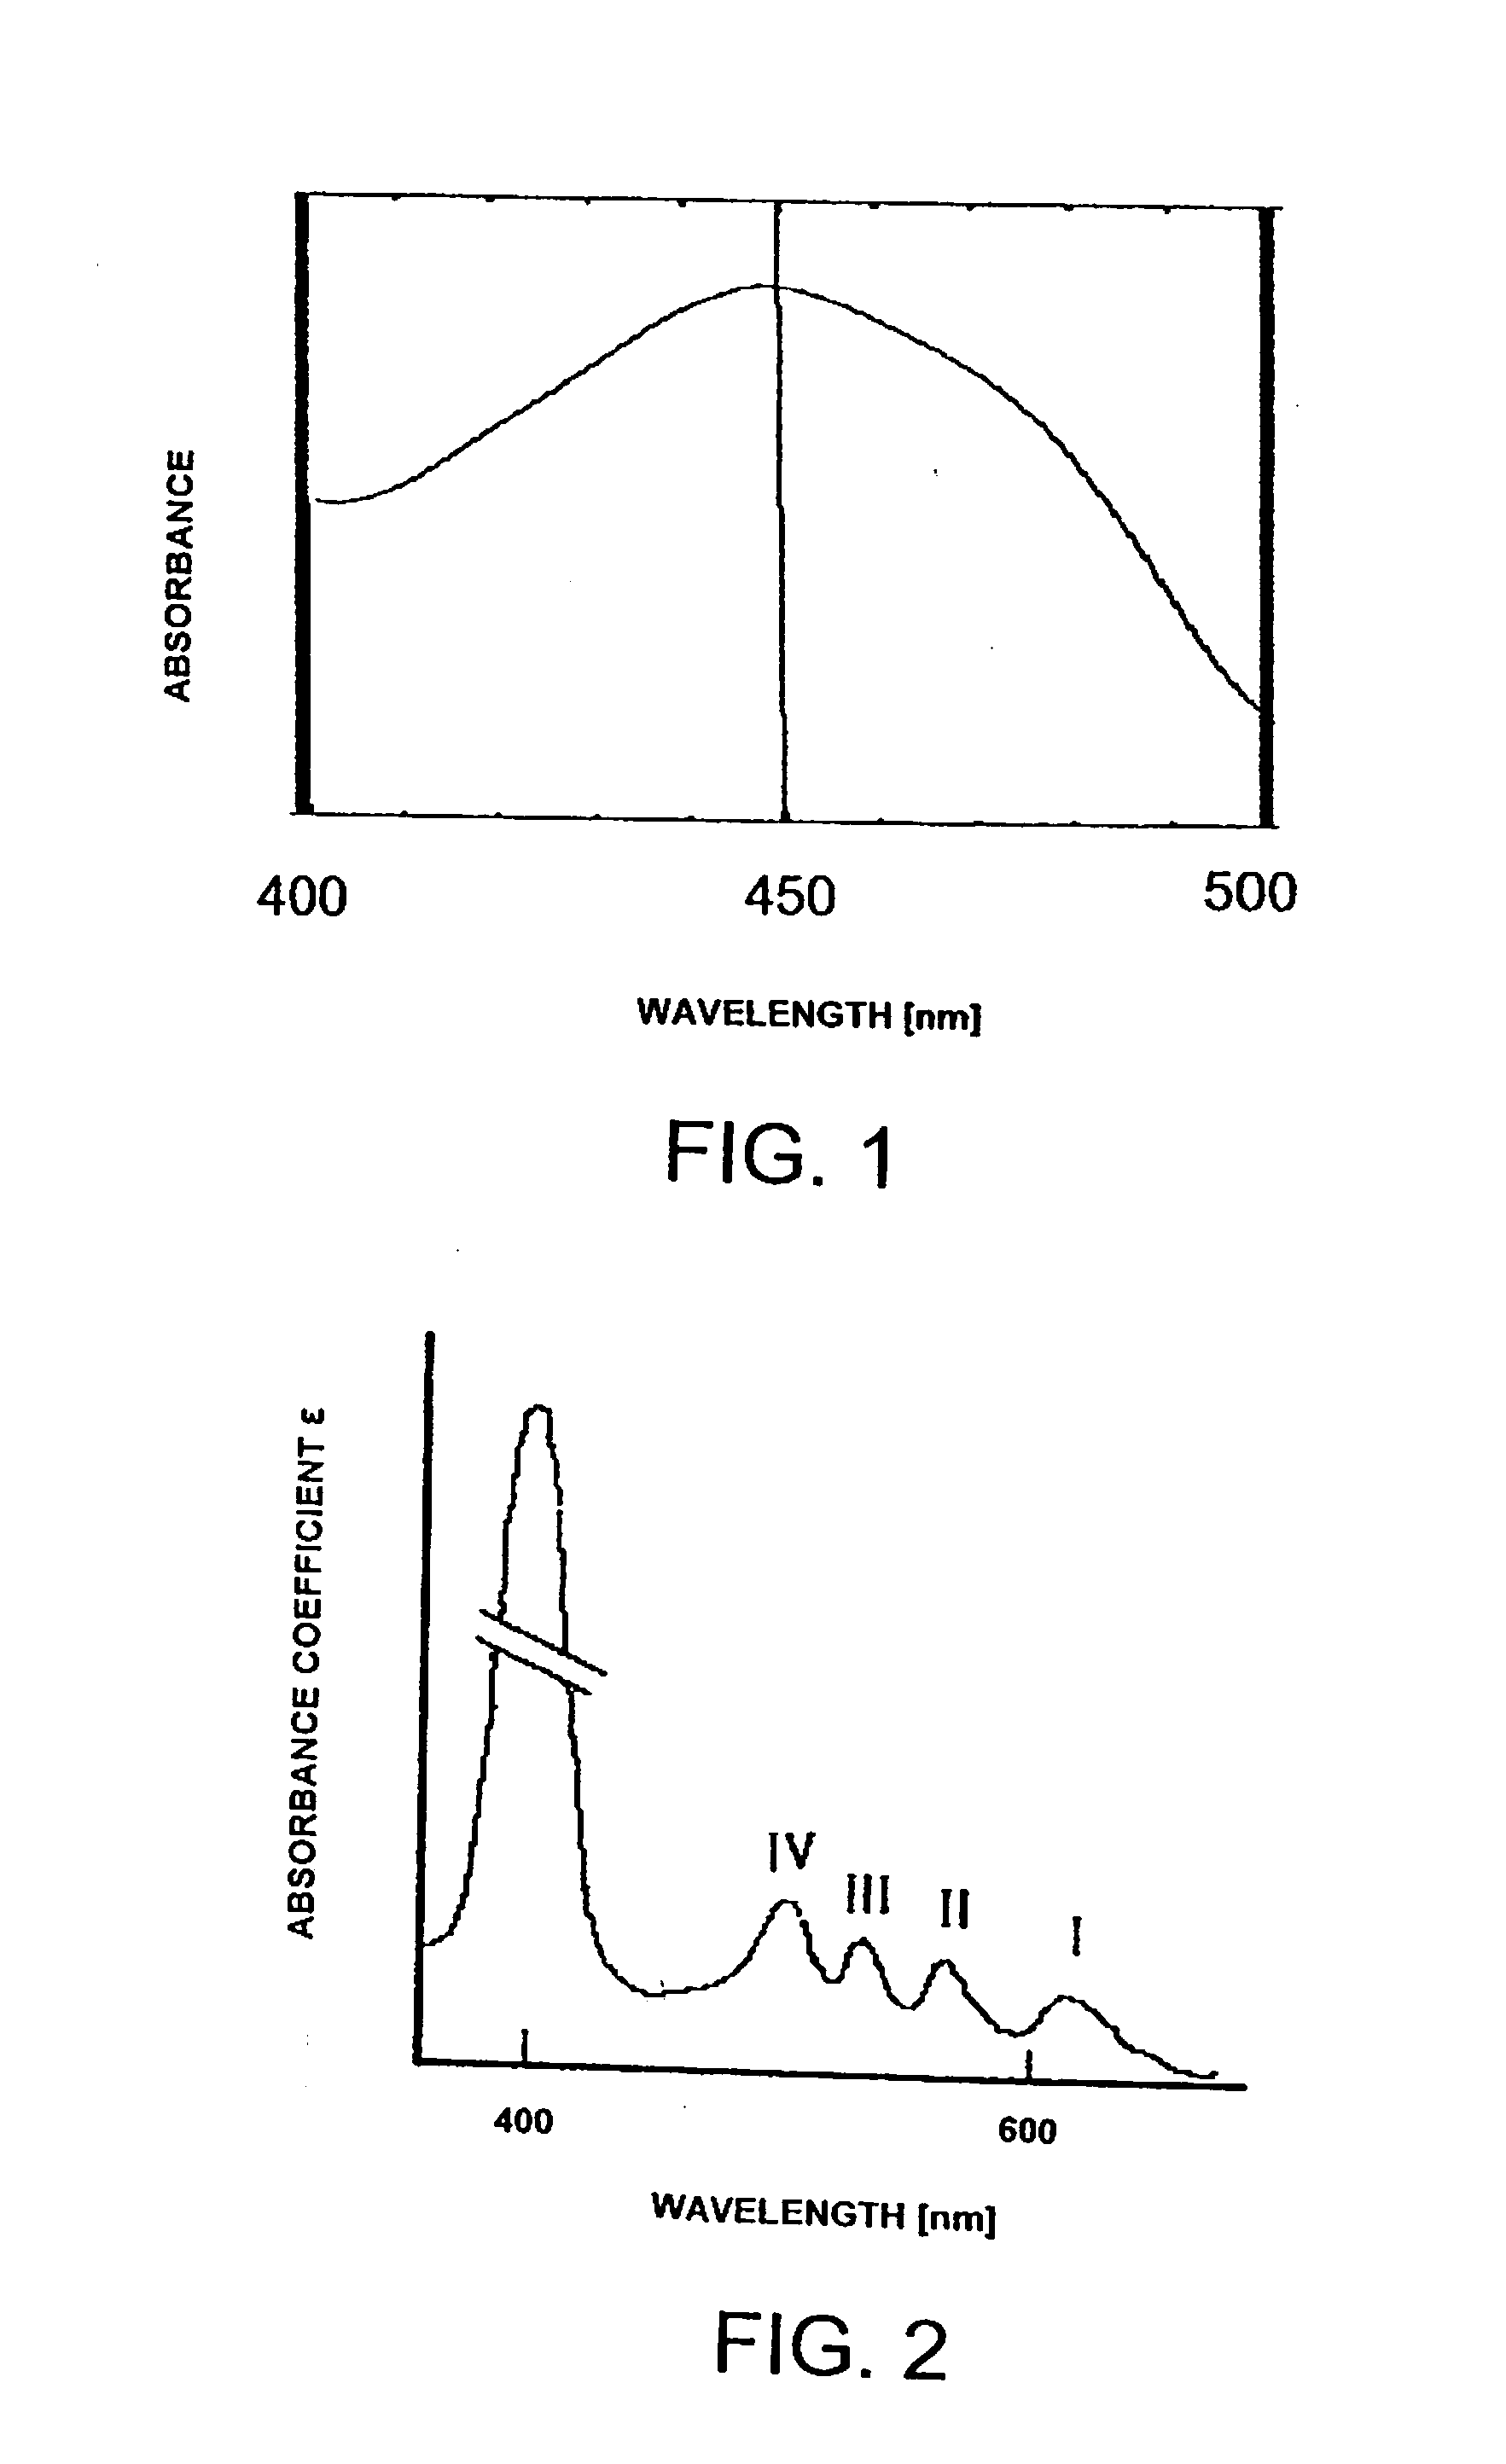 Methods and Apparatus for Reducing Count of Infectious Agents in Intravenous Access Systems